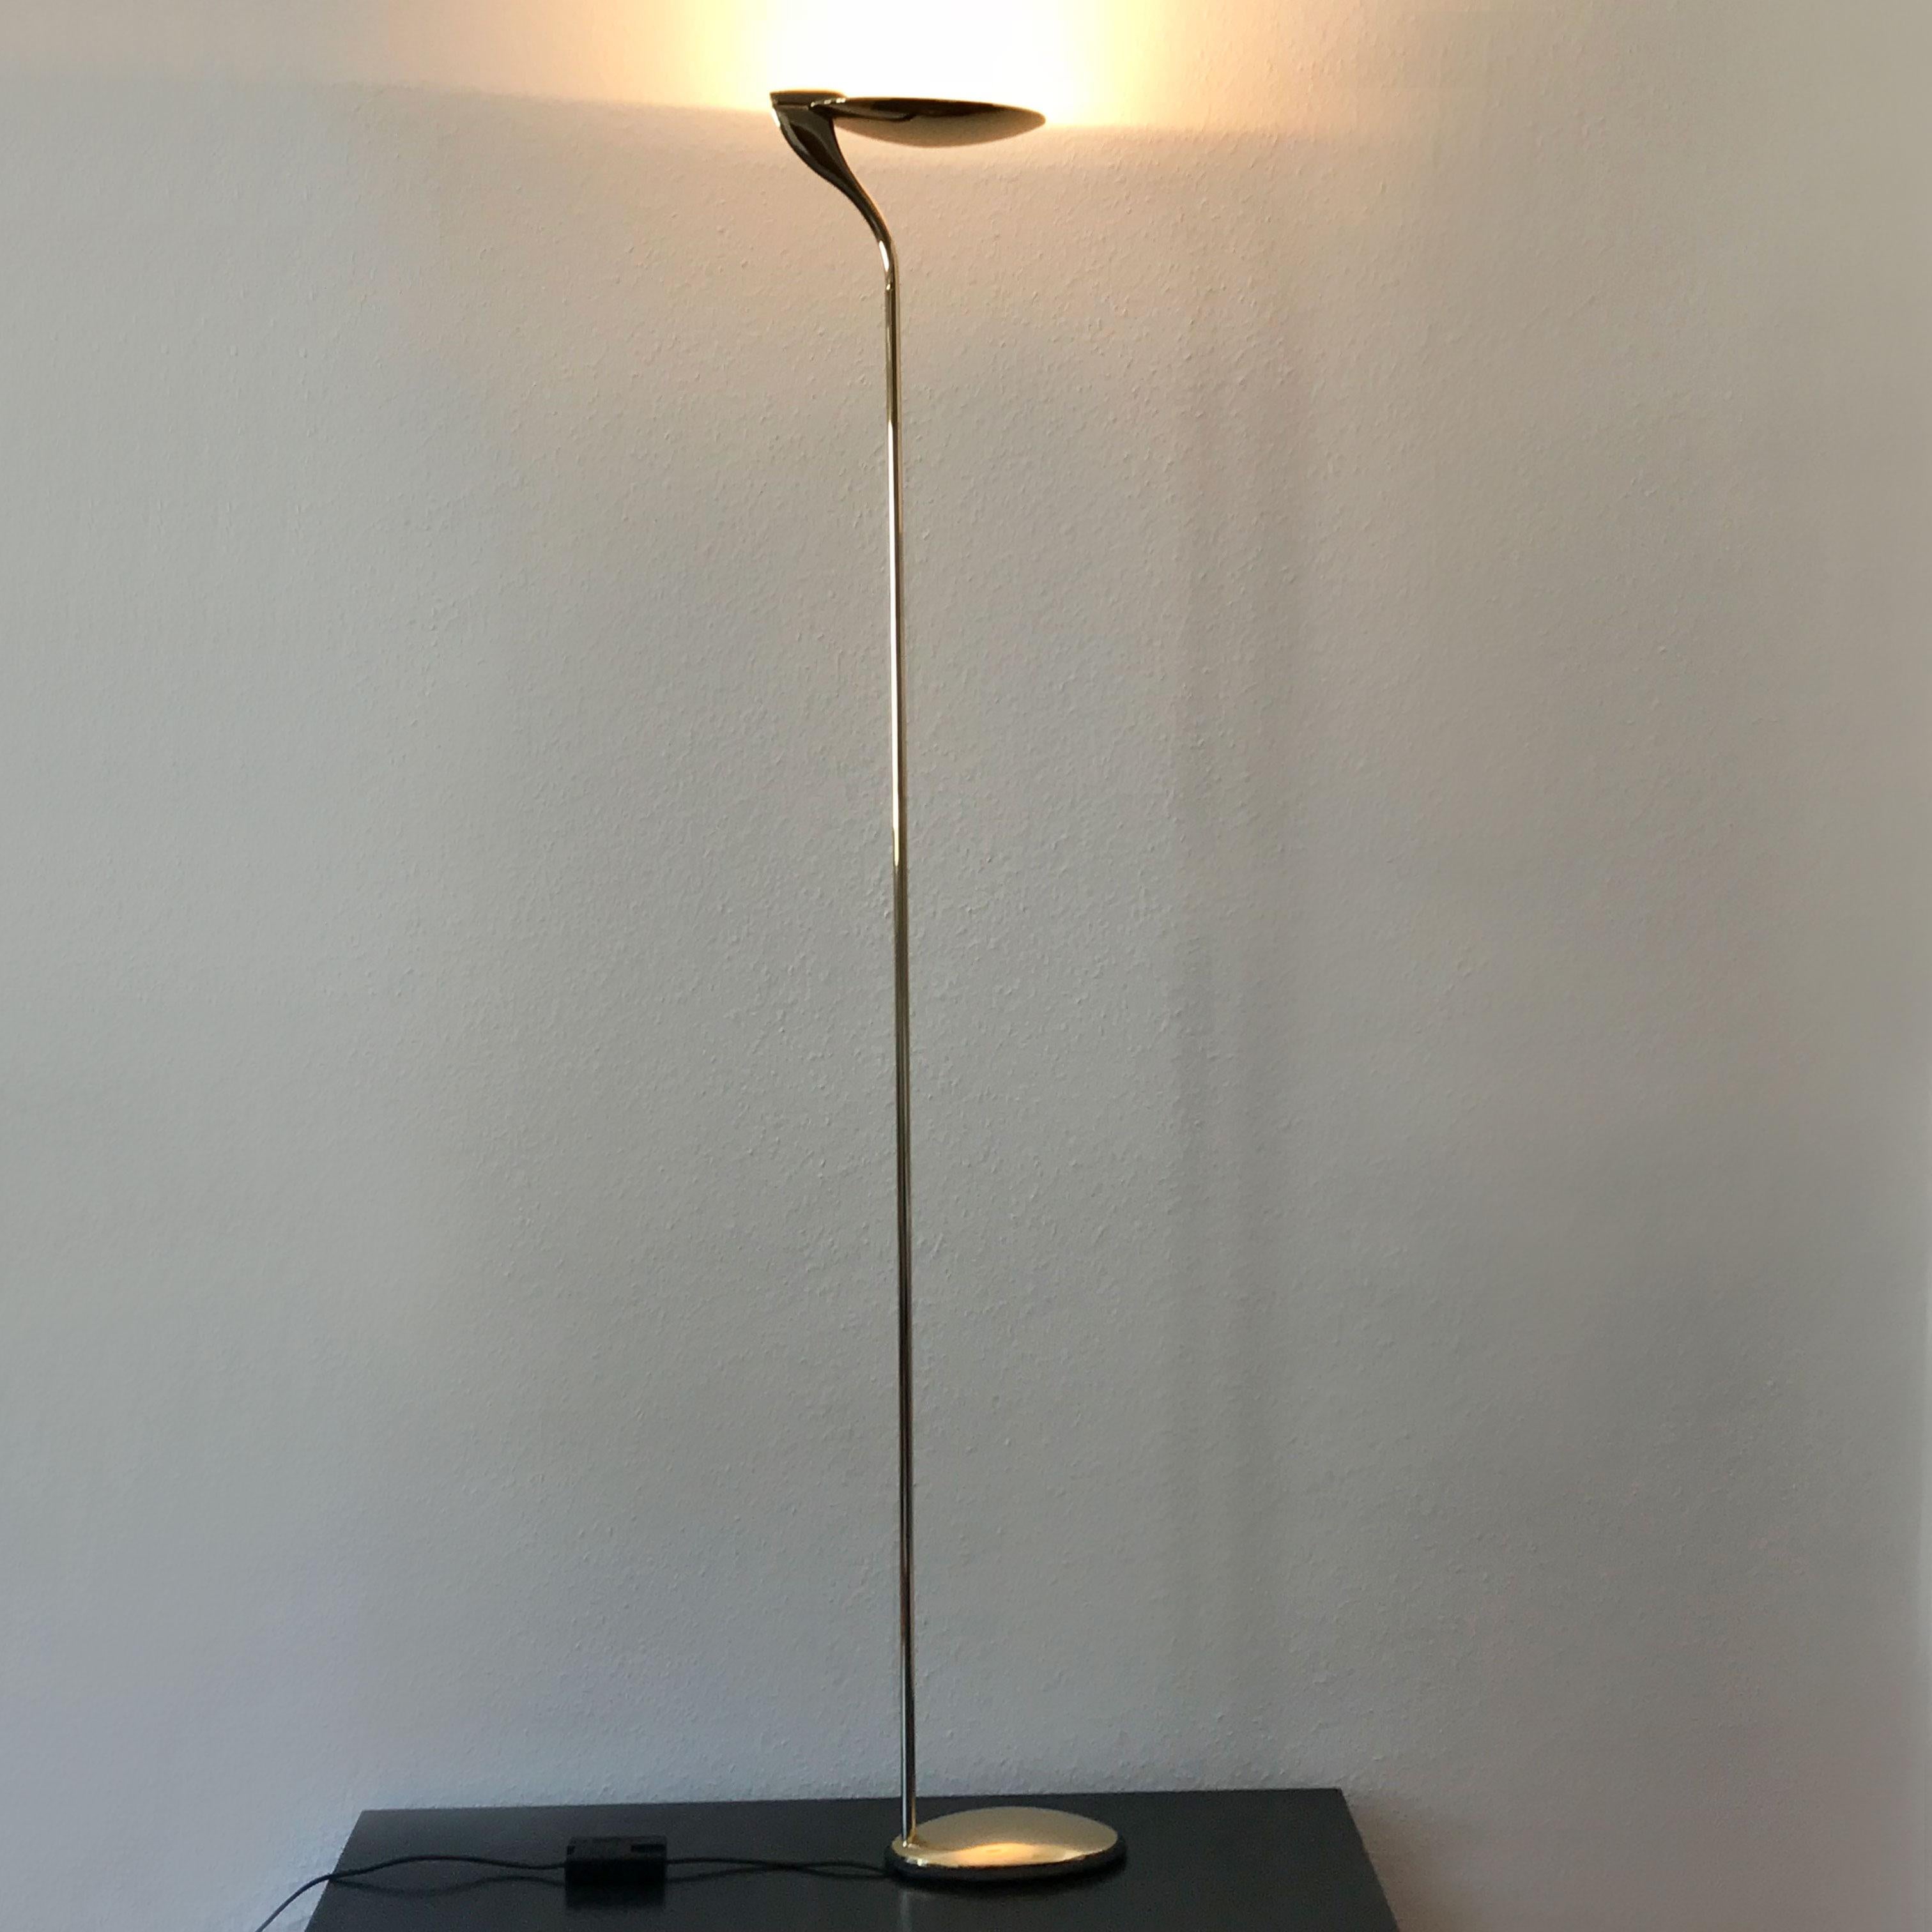 Polished Exceptional Minimalist Brass Floor Lamp Uplighter by Florian Schulz, Germany For Sale